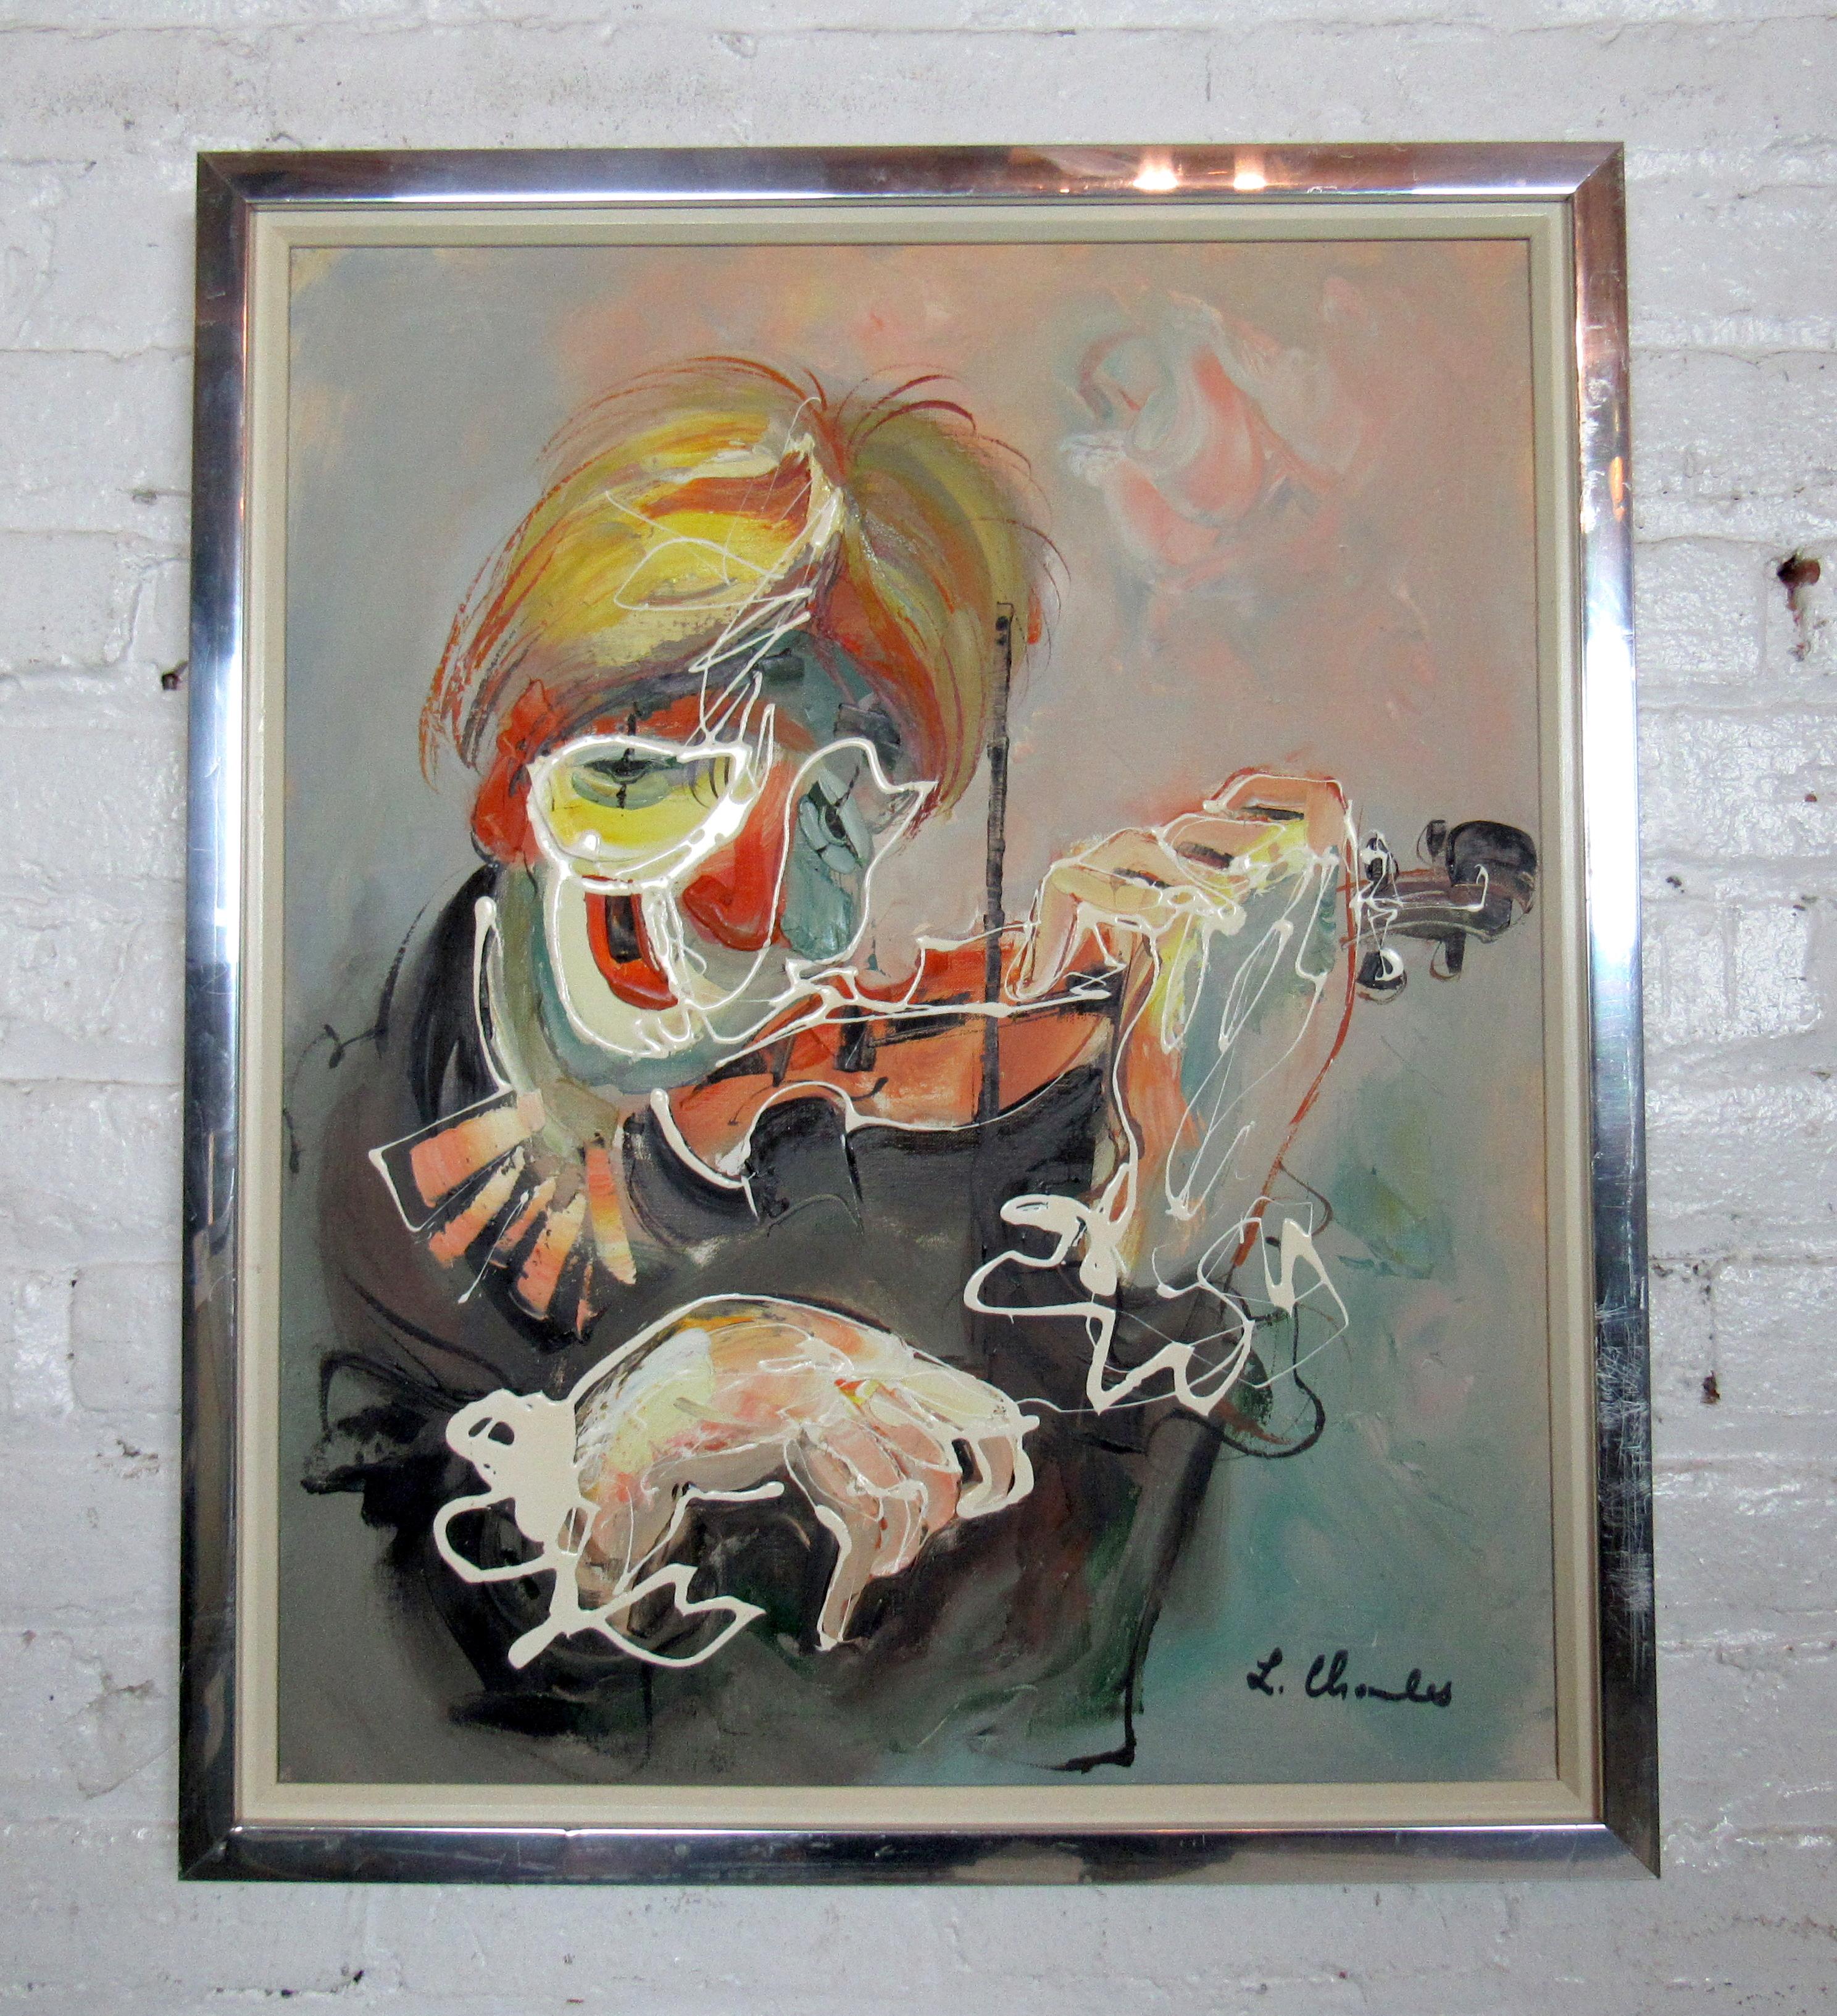 Midcentury abstract painting of a violinist playing in a silver frame by L Charles.

(Please confirm item location - NY or NJ - with dealer).